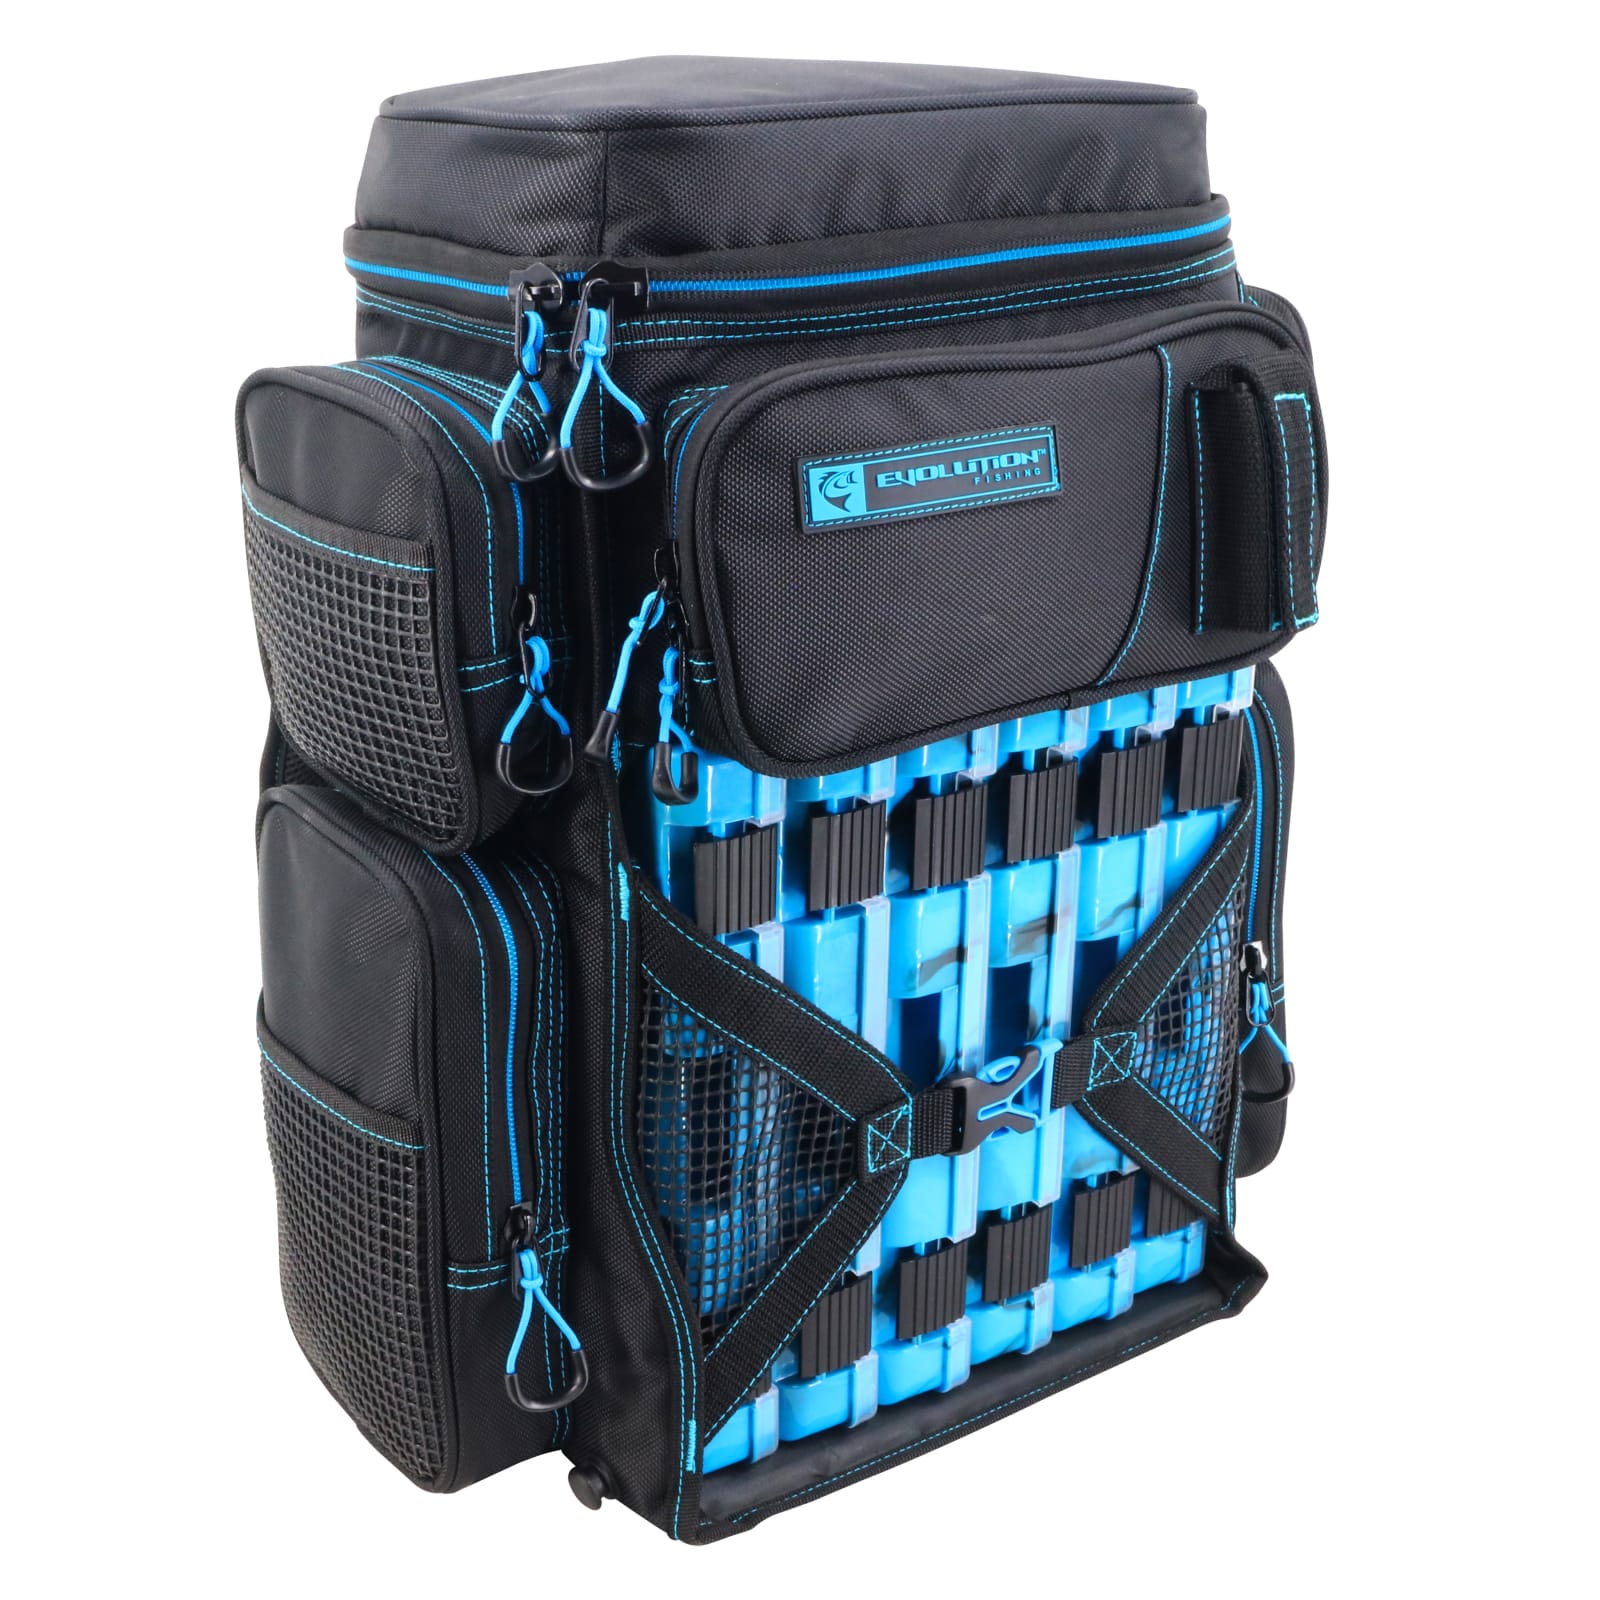 Blue/Black 3600 Drift Tackle Backpack by Evolution Outdoor at Fleet Farm